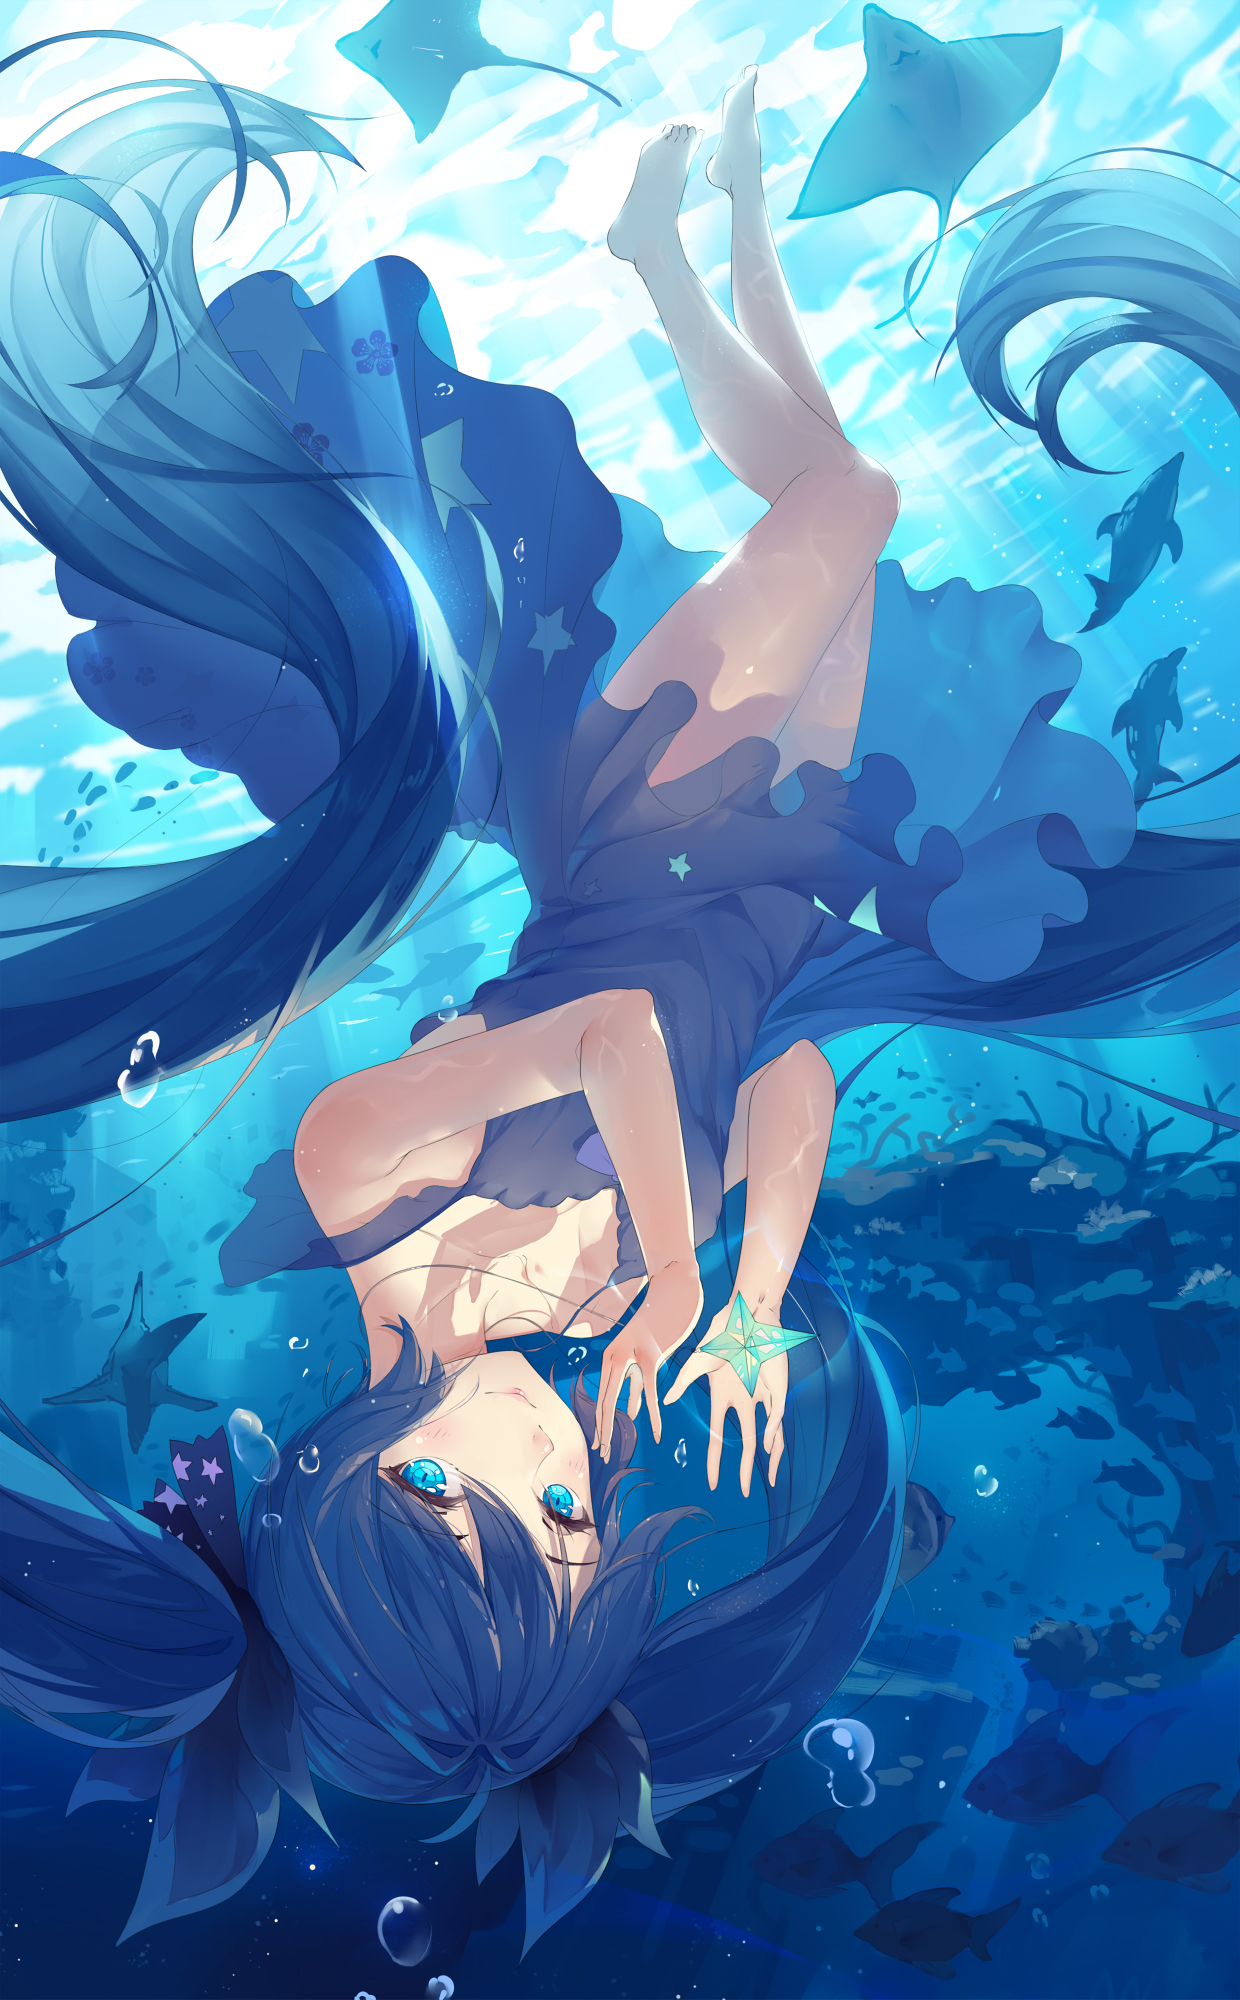 Anime 1240x2000 Pixiv anime anime girls portrait display blue hair blue eyes Hatsune Miku Vocaloid underwater water in water dress twintails long hair bubbles smiling sunlight fish animals